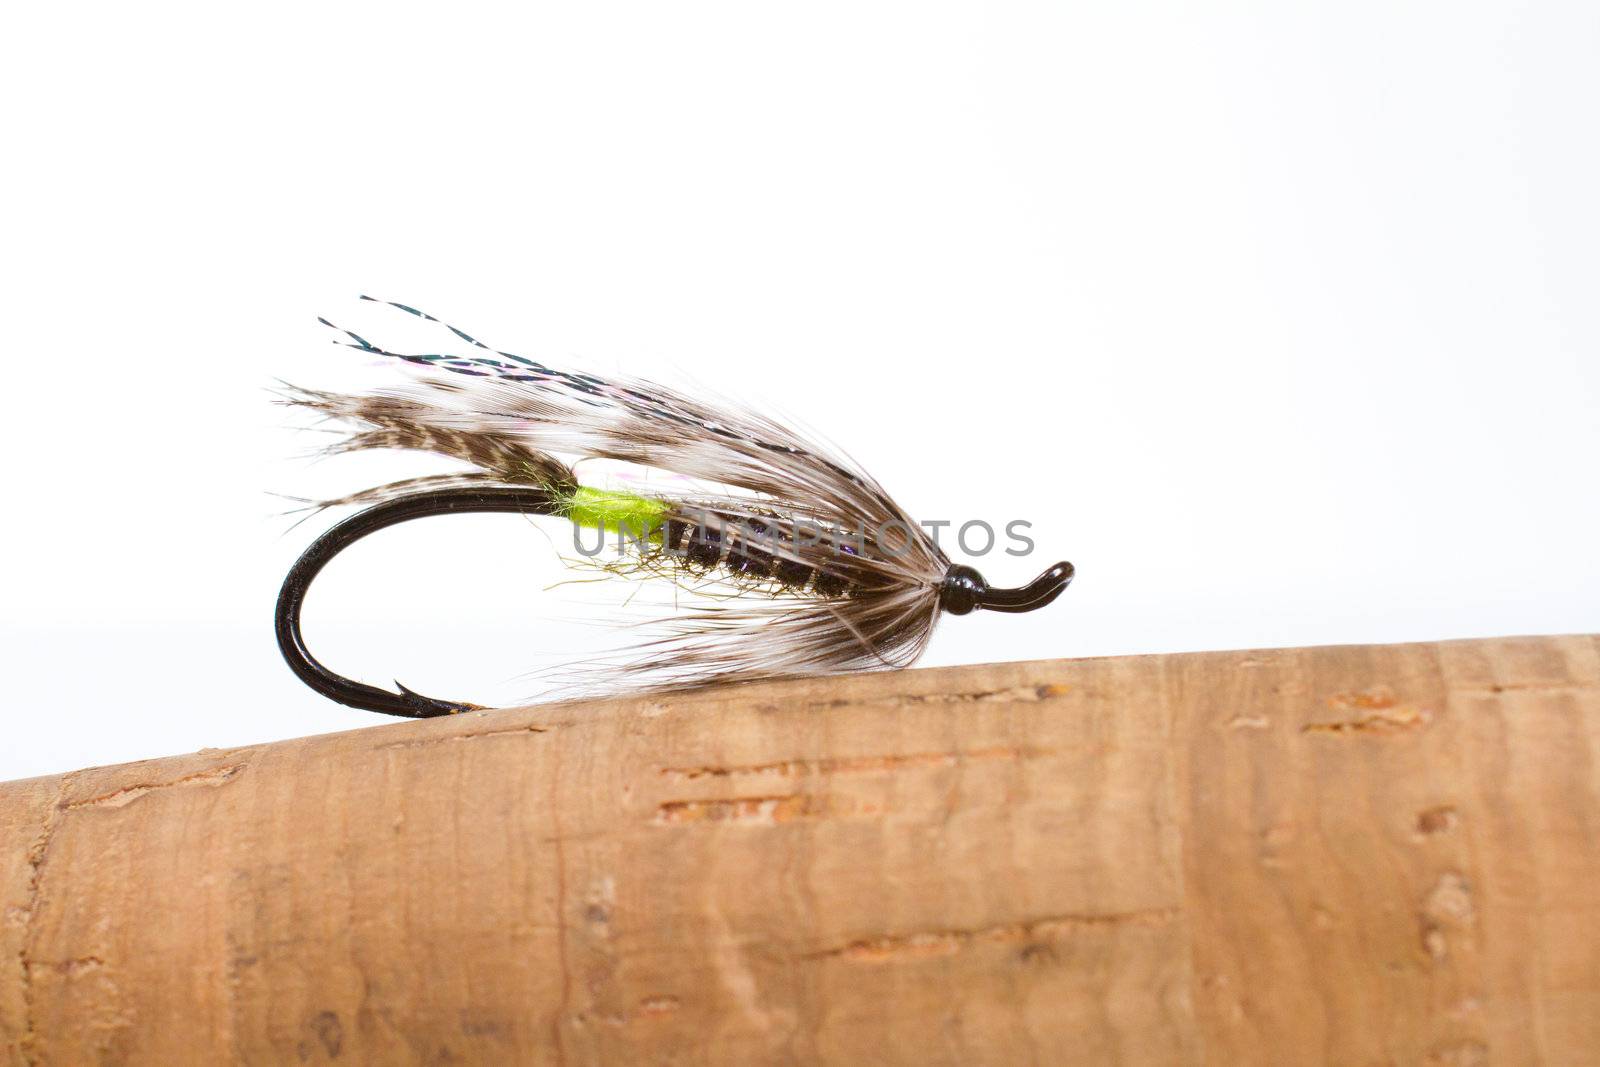 This green butted silver hilton steelhead fly fishing streamer is isolated against a white background in the studio along with the cork handle of the fly fishing rod.